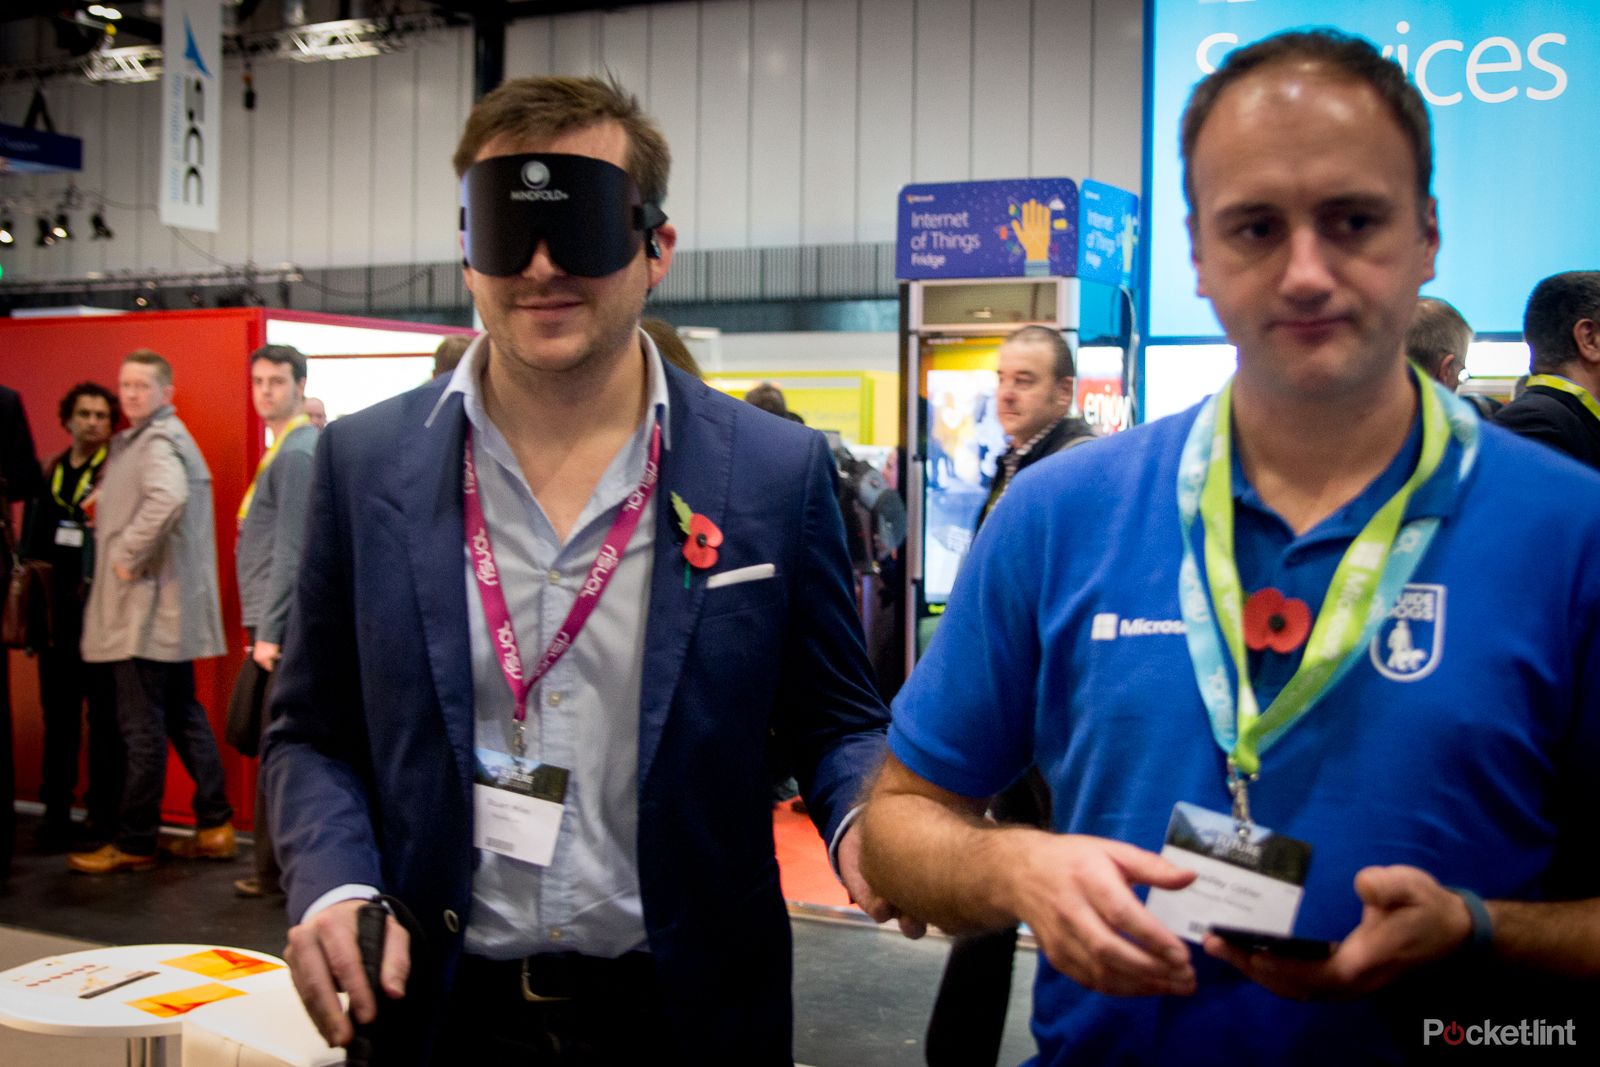 microsoft headset could change the way blind people get about cities we test it ourselves image 2